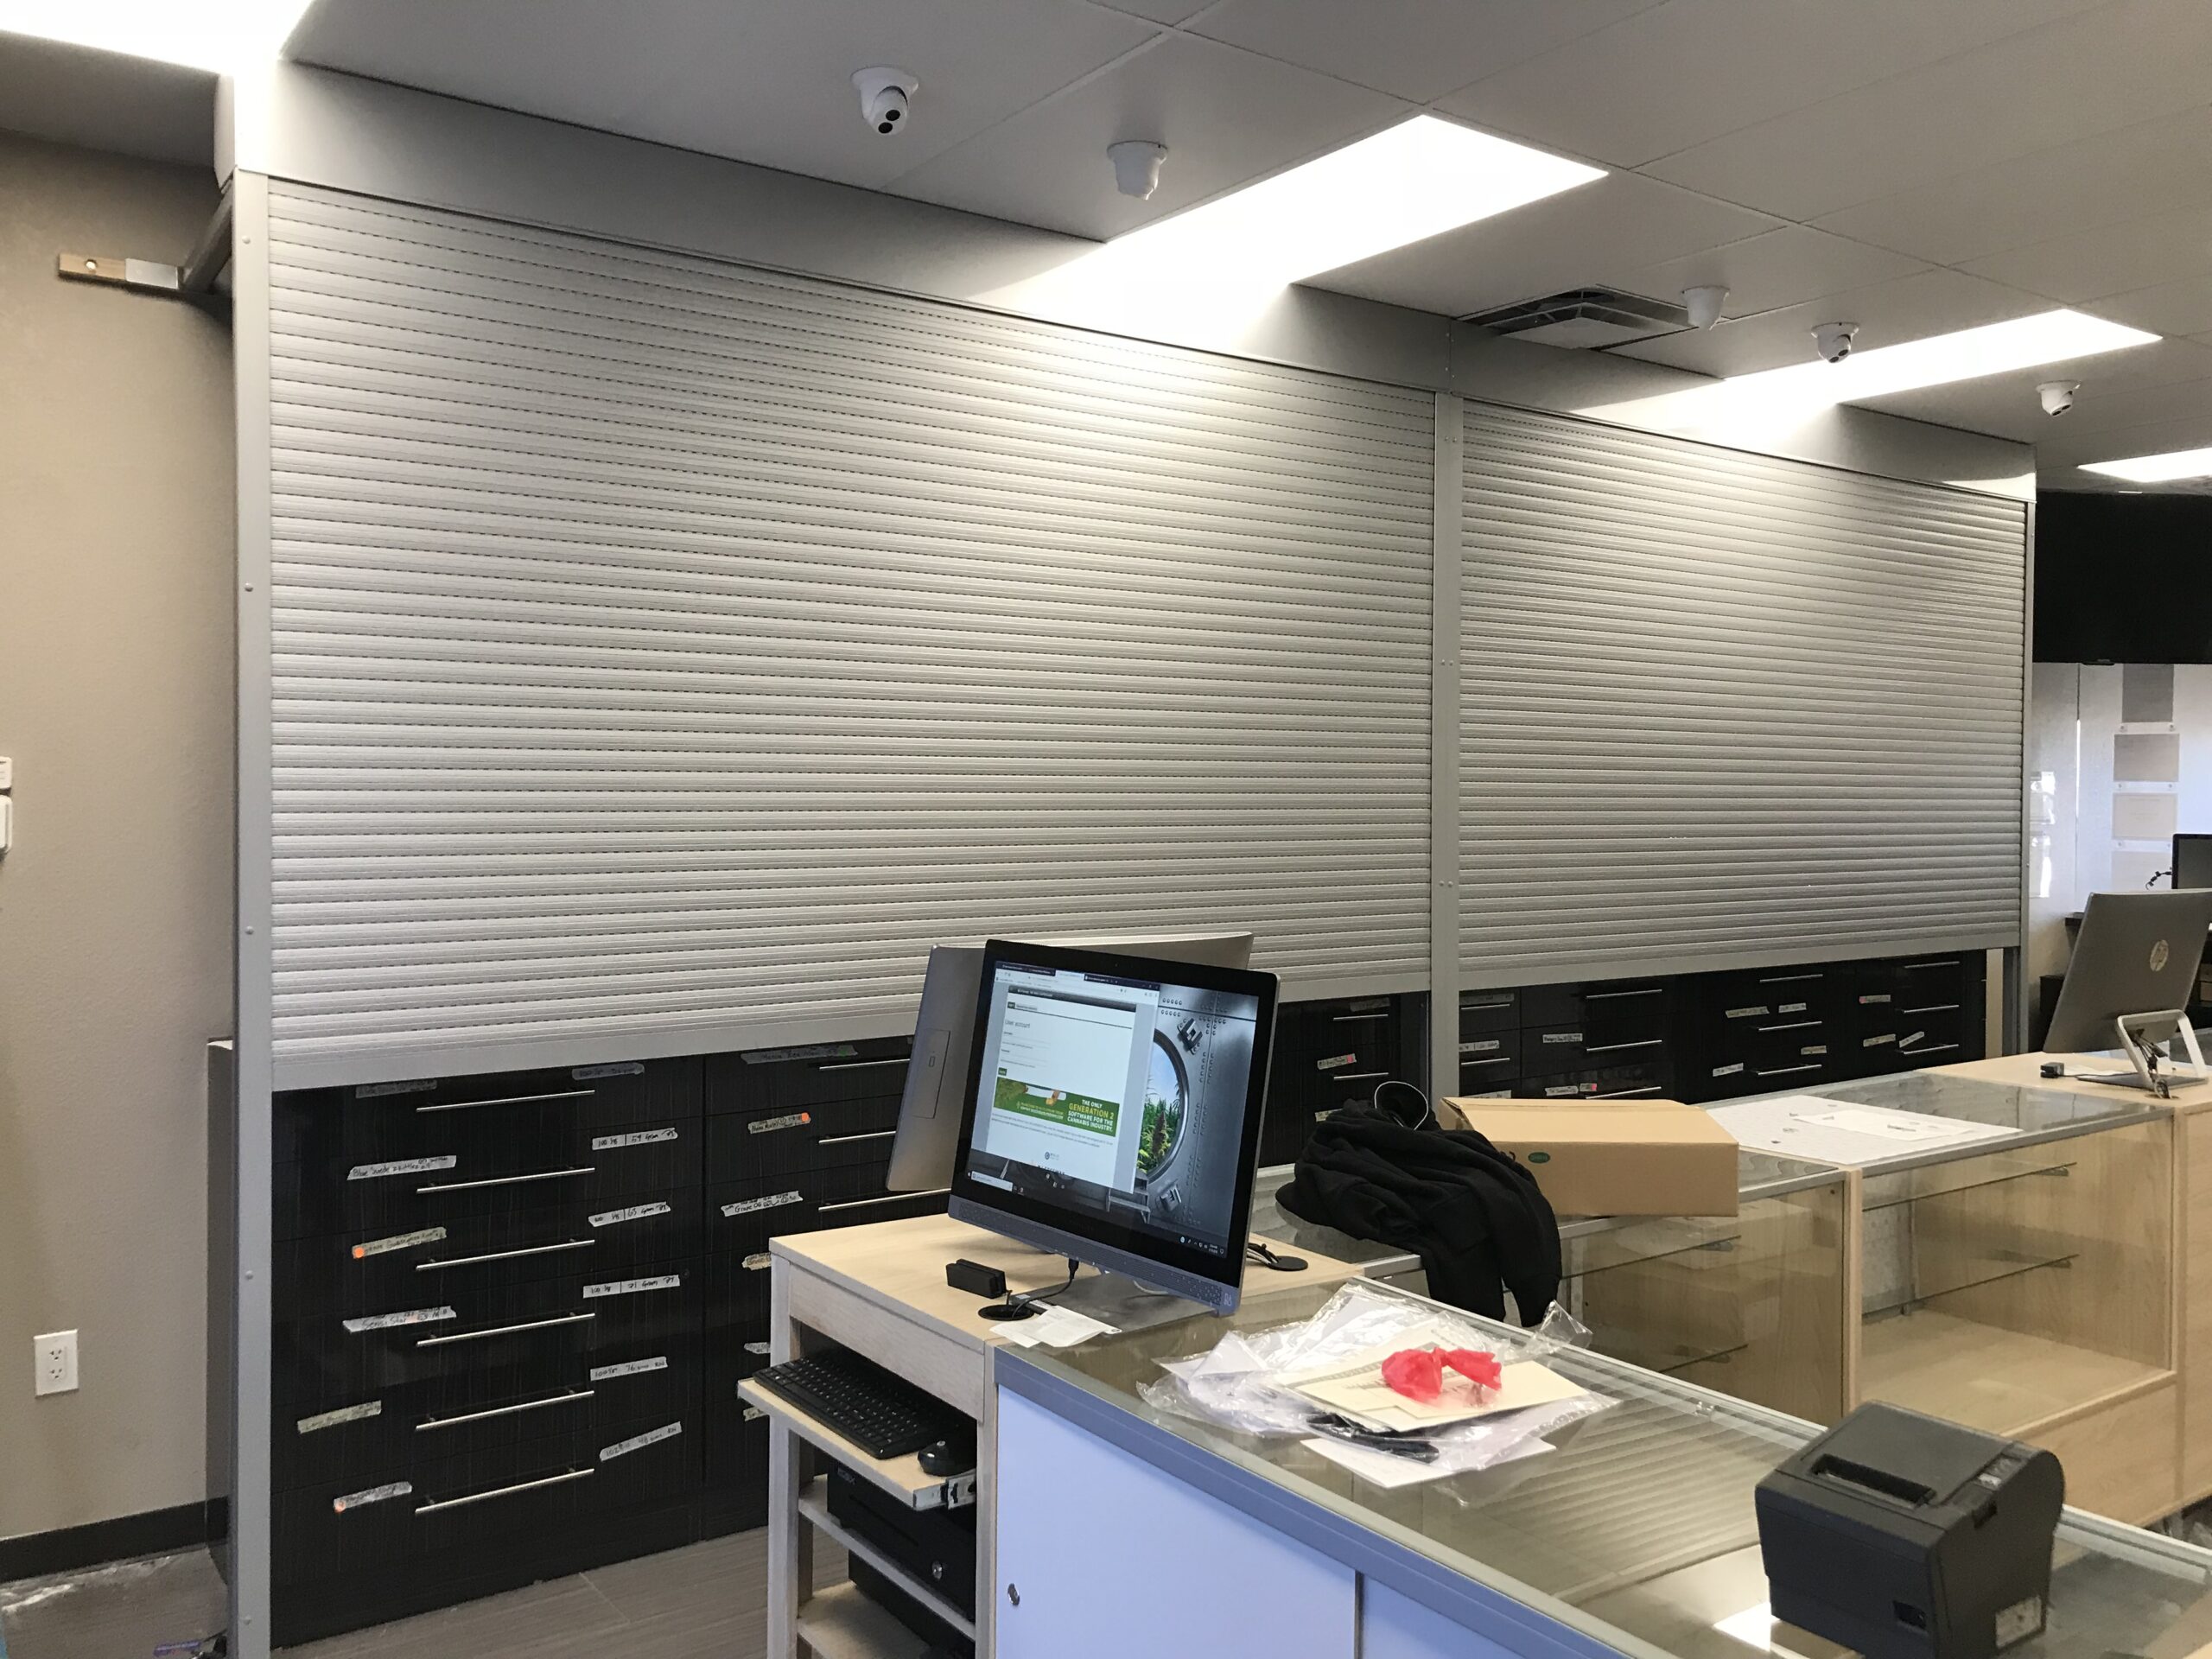 An image showing closed interior commercial rolling shutters 